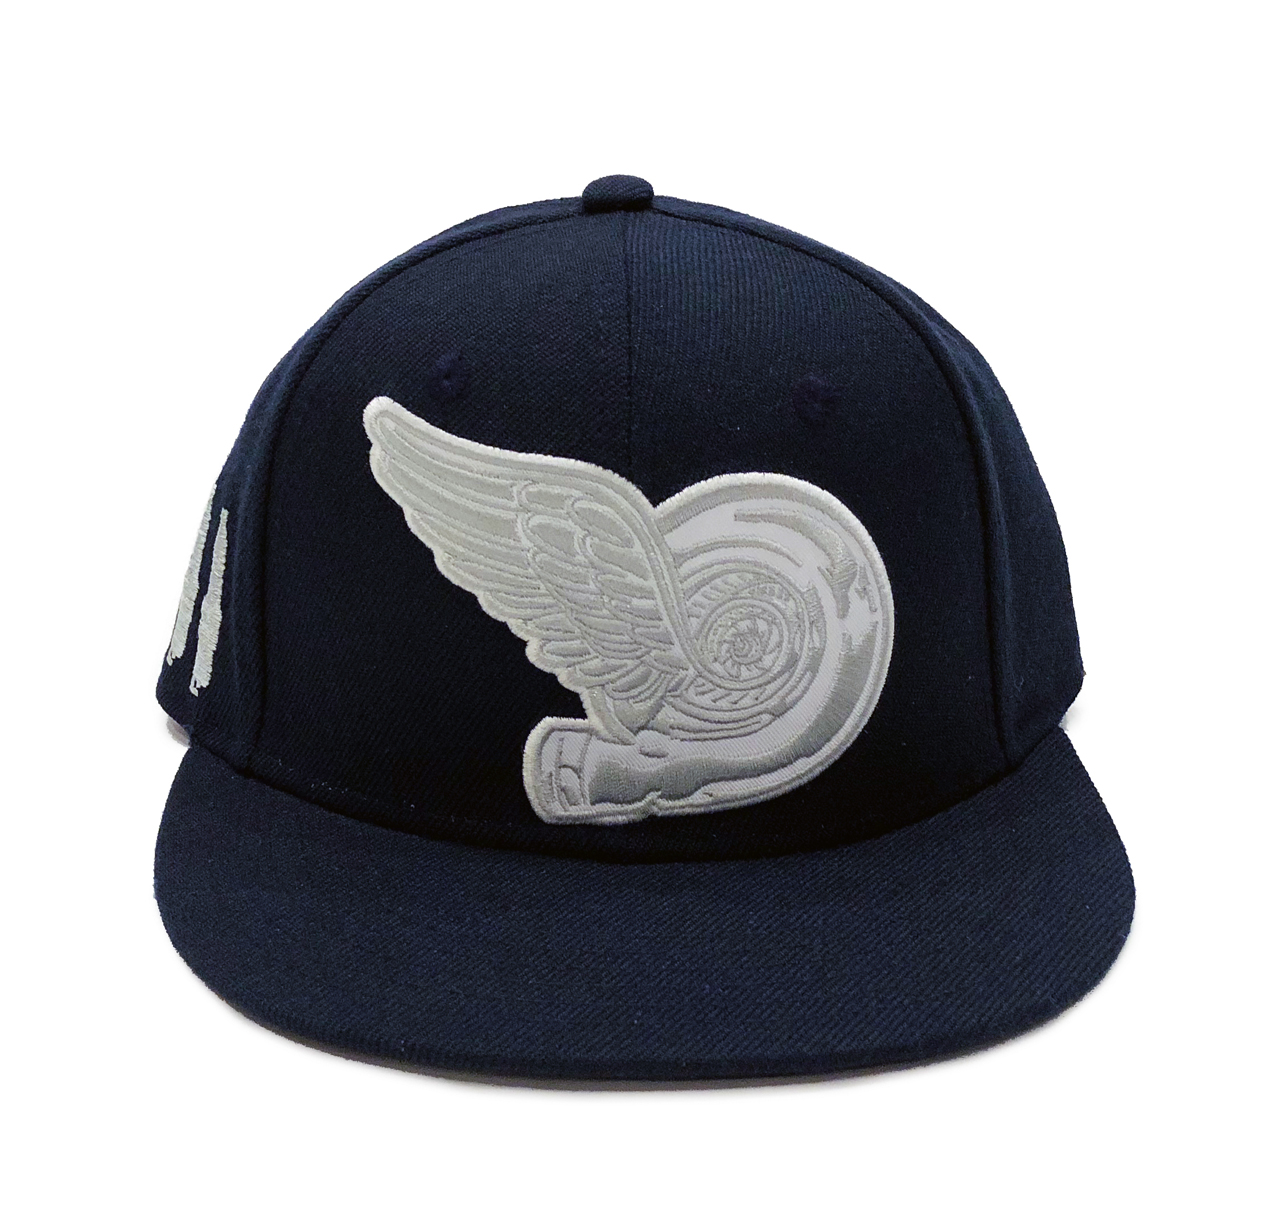 Turbo Wing Fitted Hat | Navy Blue